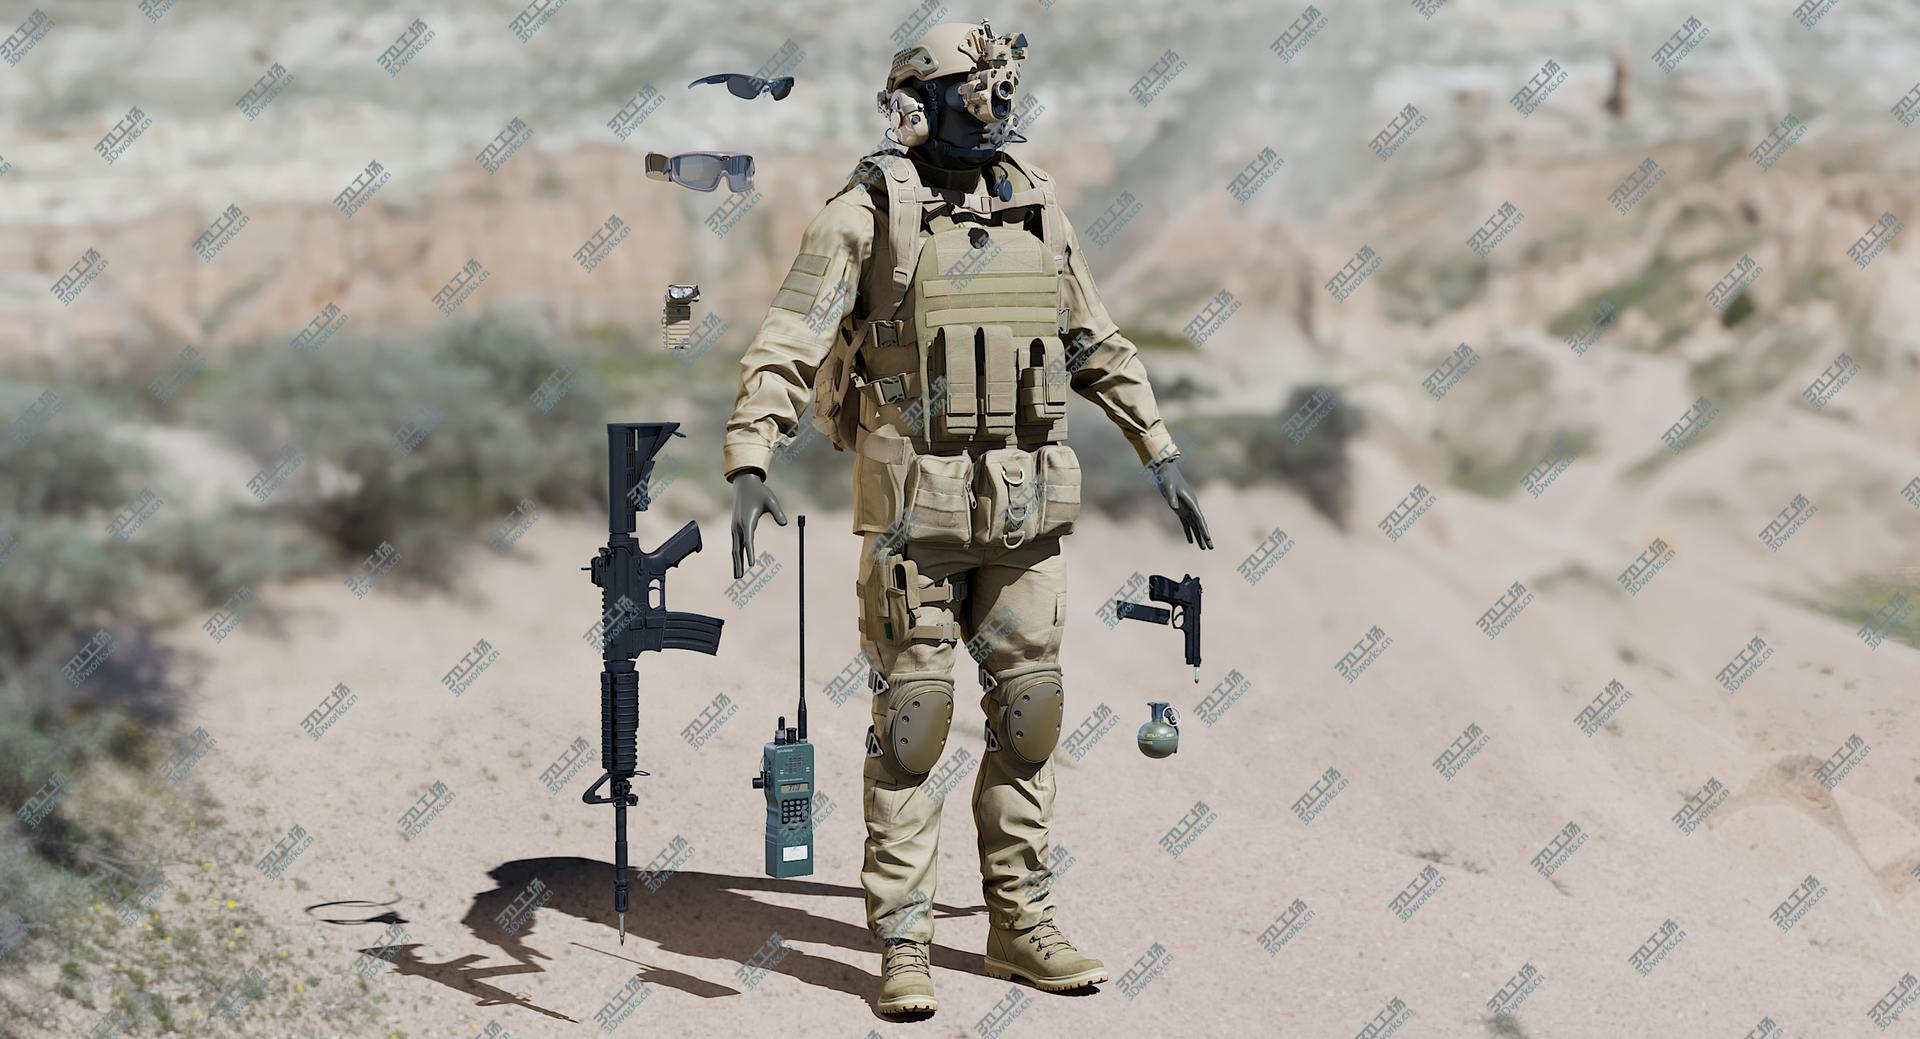 images/goods_img/20210113/3D Military SWAT Police Terrorist Uniform Collection model/2.jpg